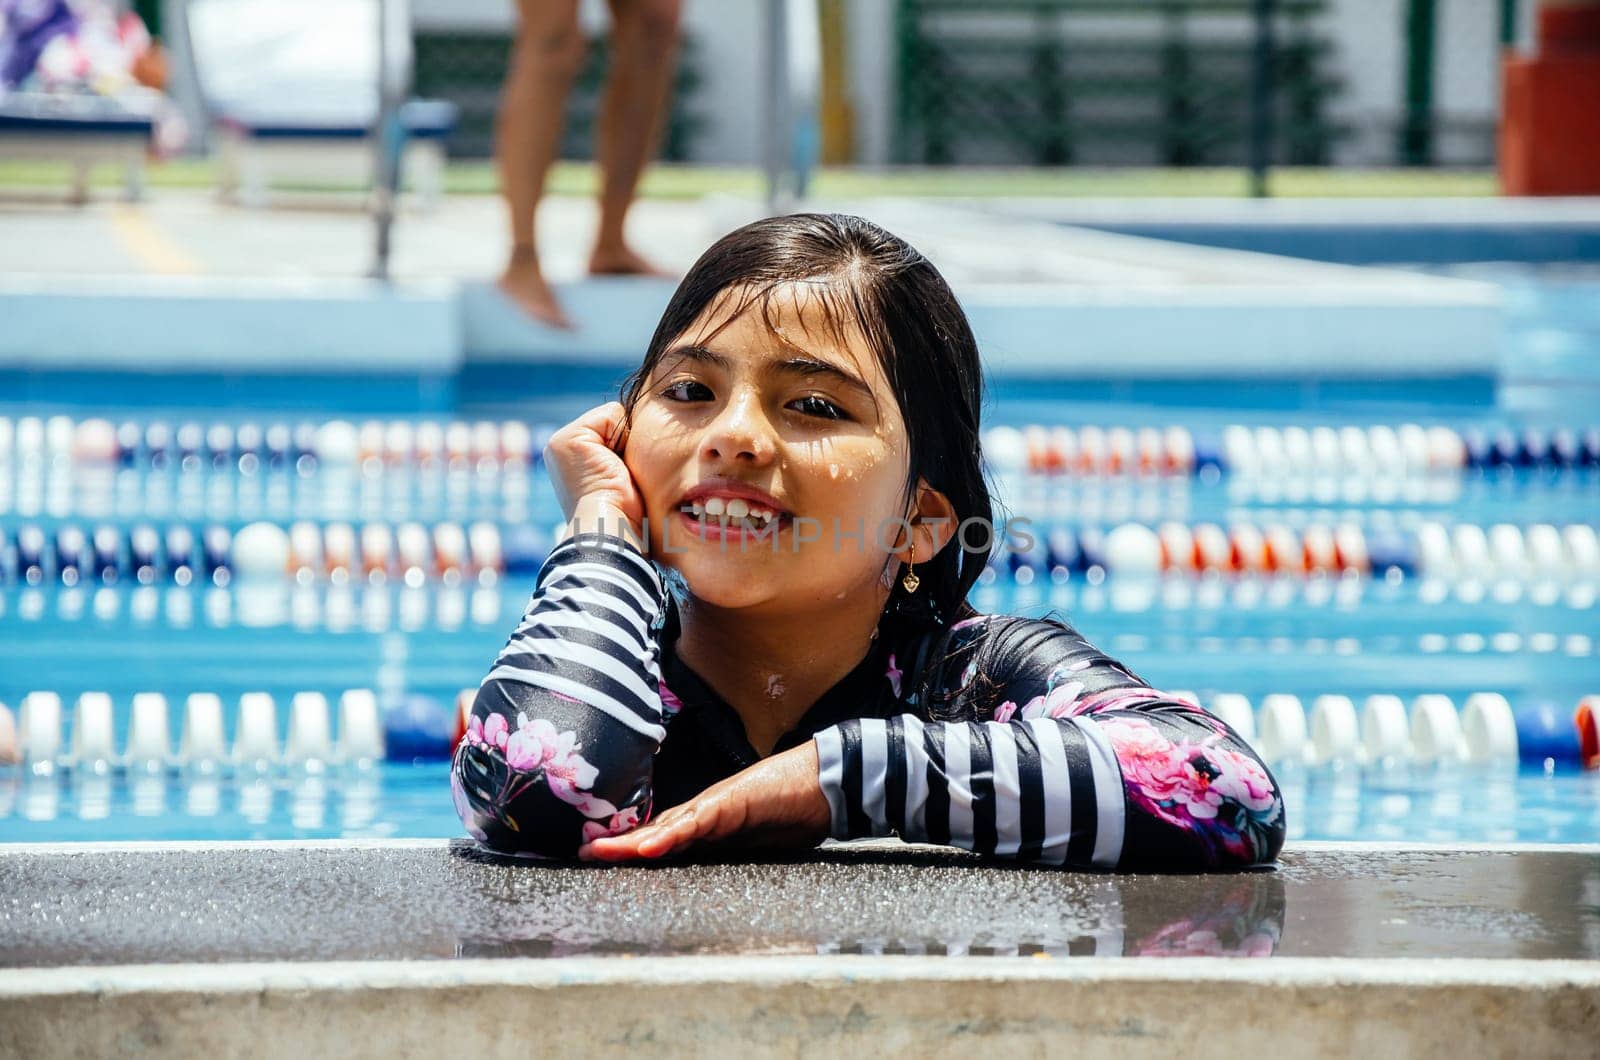 Portrait of a smiling girl in the pool. by Peruphotoart